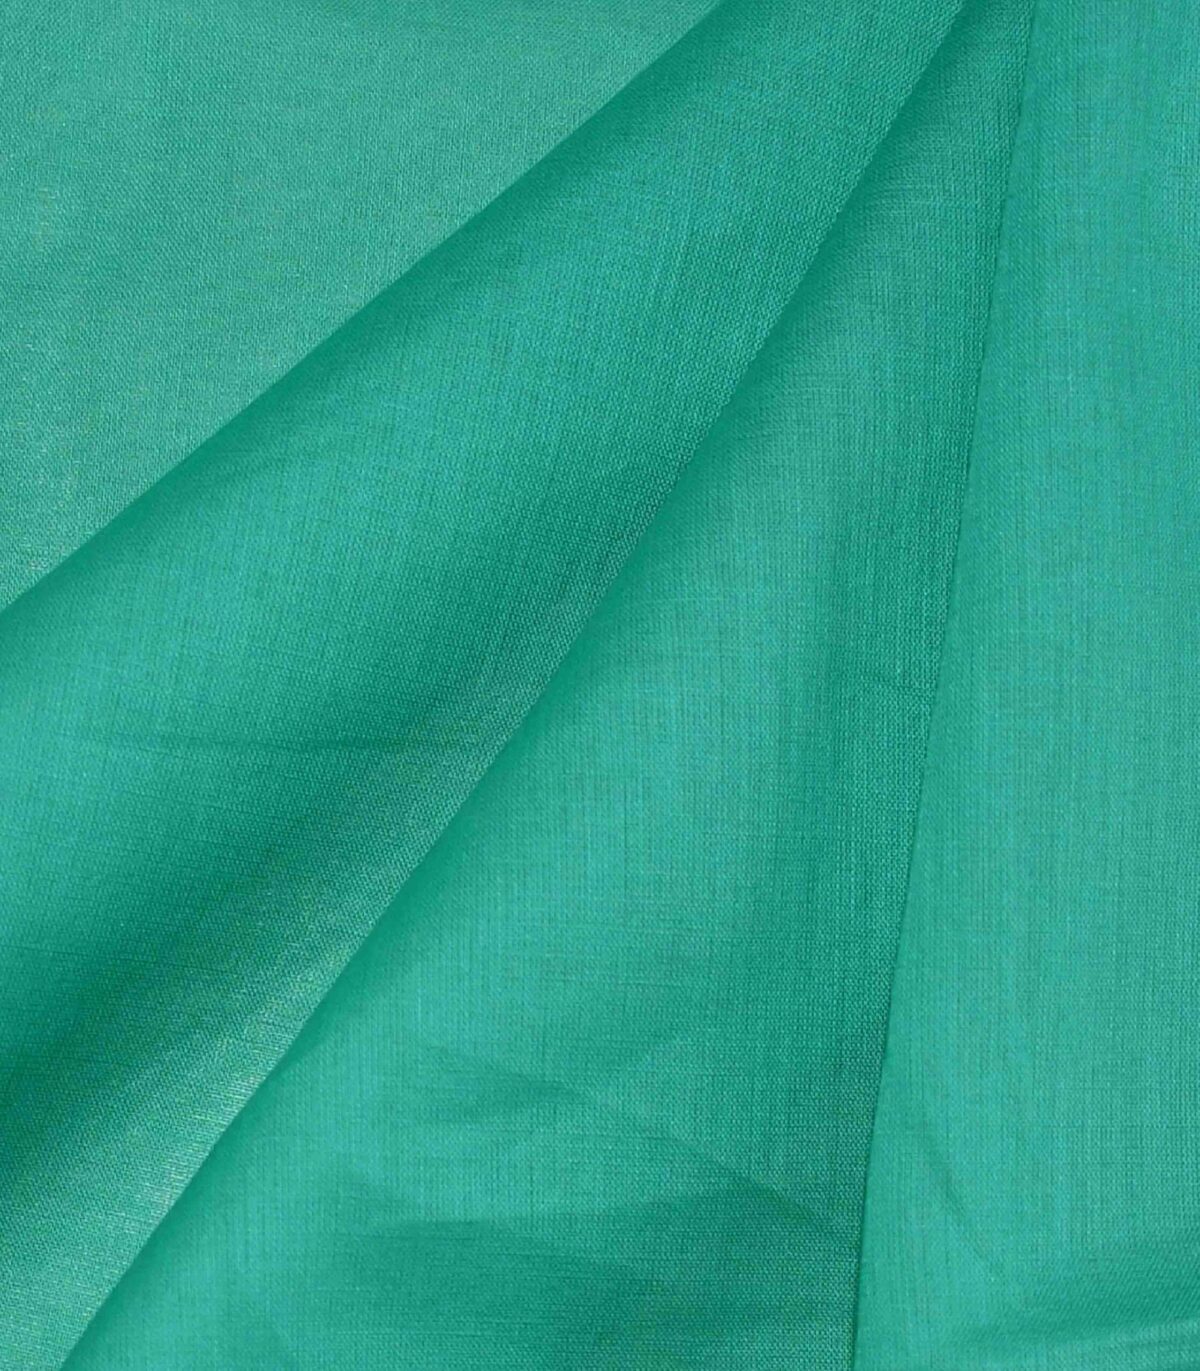 Green Dyed Cotton Fabric